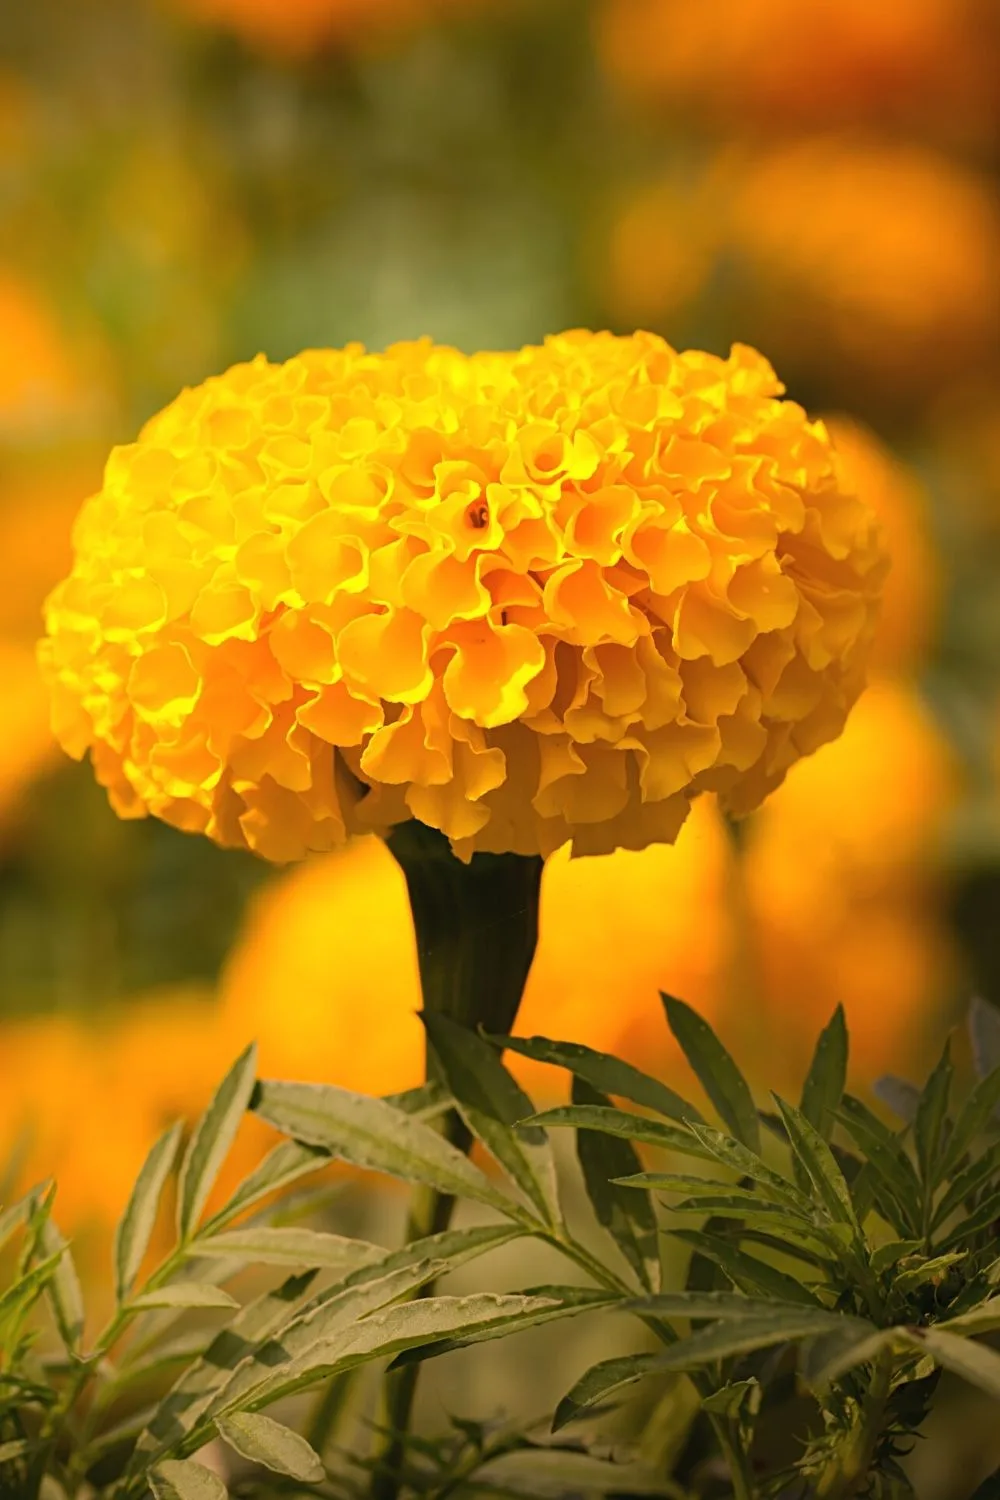 Marigold, known for its dark-green foliage and reddish stem, is another stunning plant you can grow on your south-facing balcony